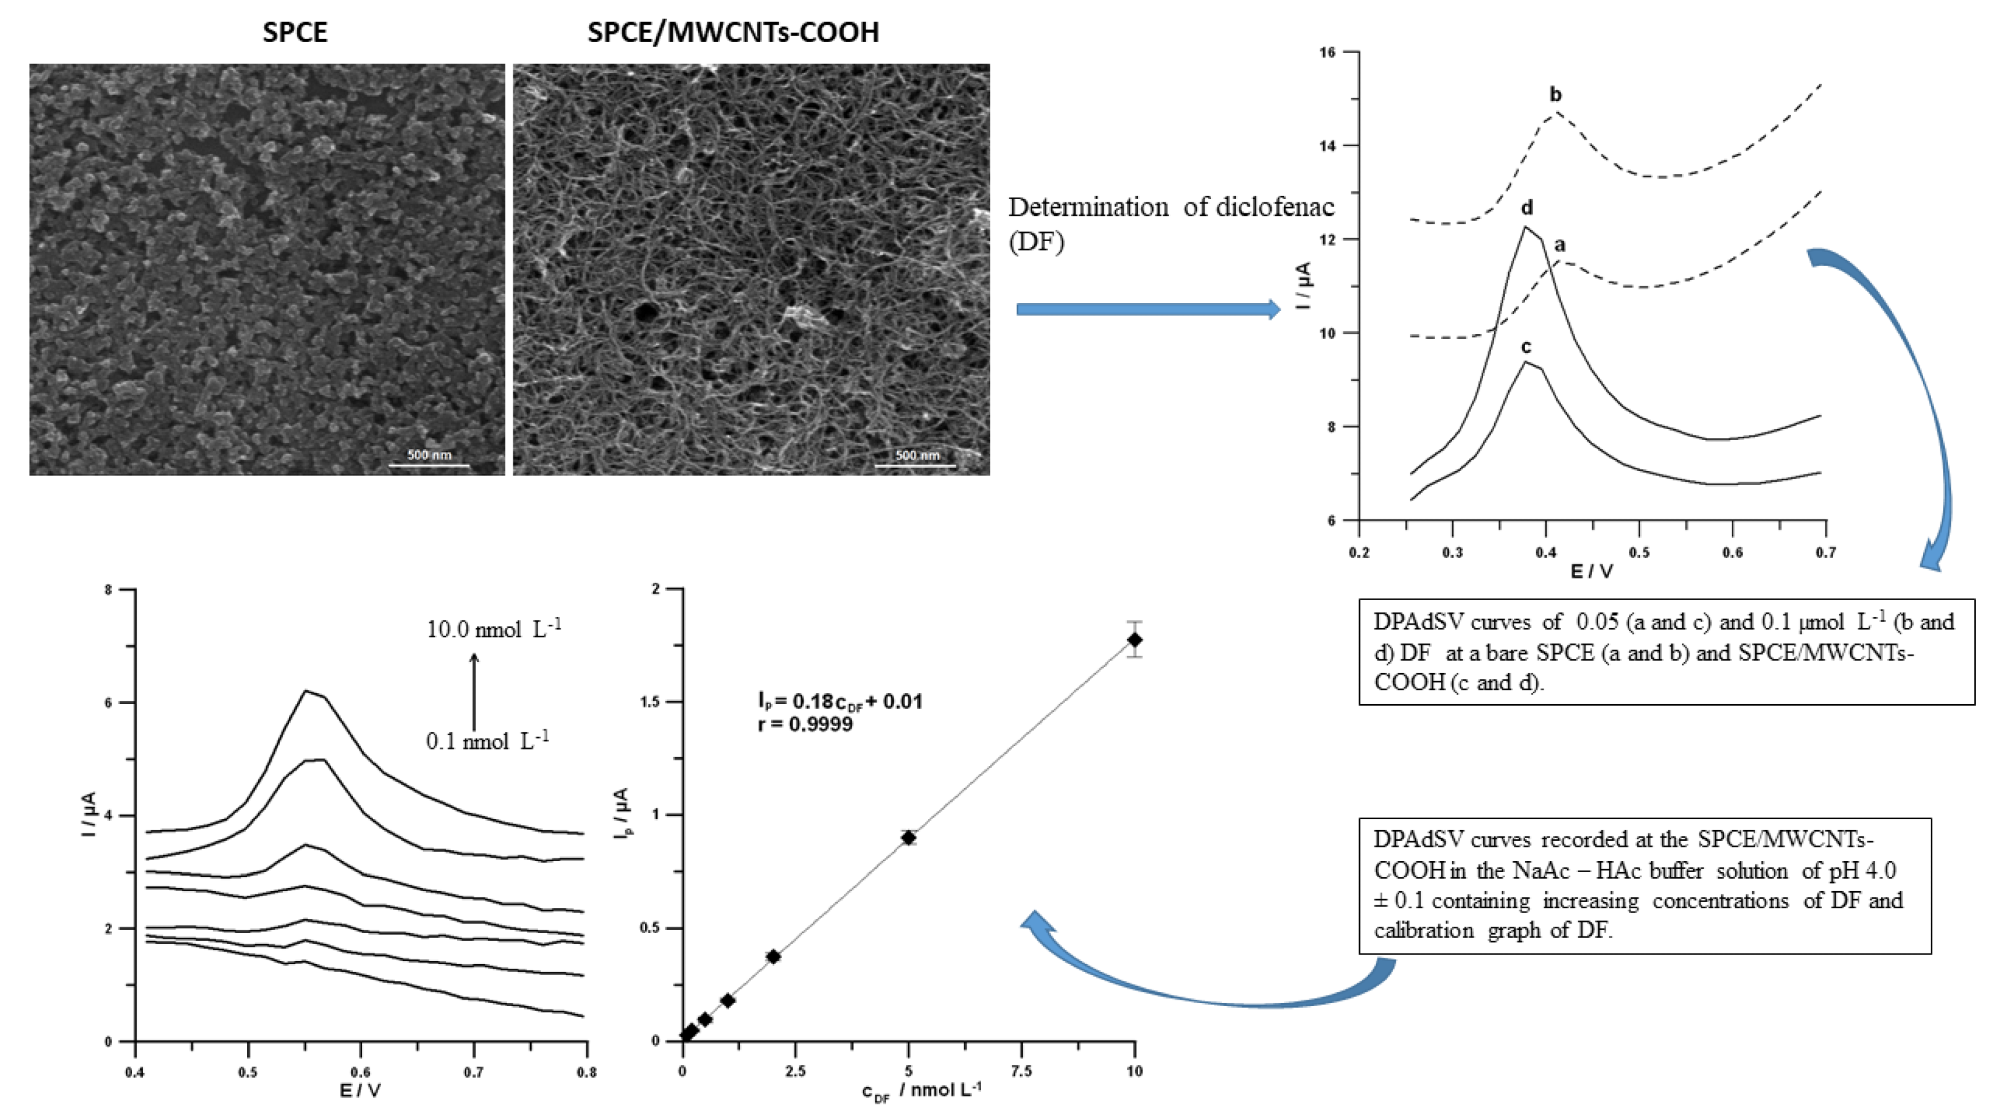 SEM images and DPAdSV curves recorded at the SPCE and SPCE/MWCNTs-COOH. DPAdSV curves recorded at the surface of the SPCE/MWCNTs-COOH in solution containing increasing concentrations of DF: 0.1, 0.2, 0.5, 1.0, 2.0, 5.0 and 10.0 nmol L-1, and calibration graph of DF.